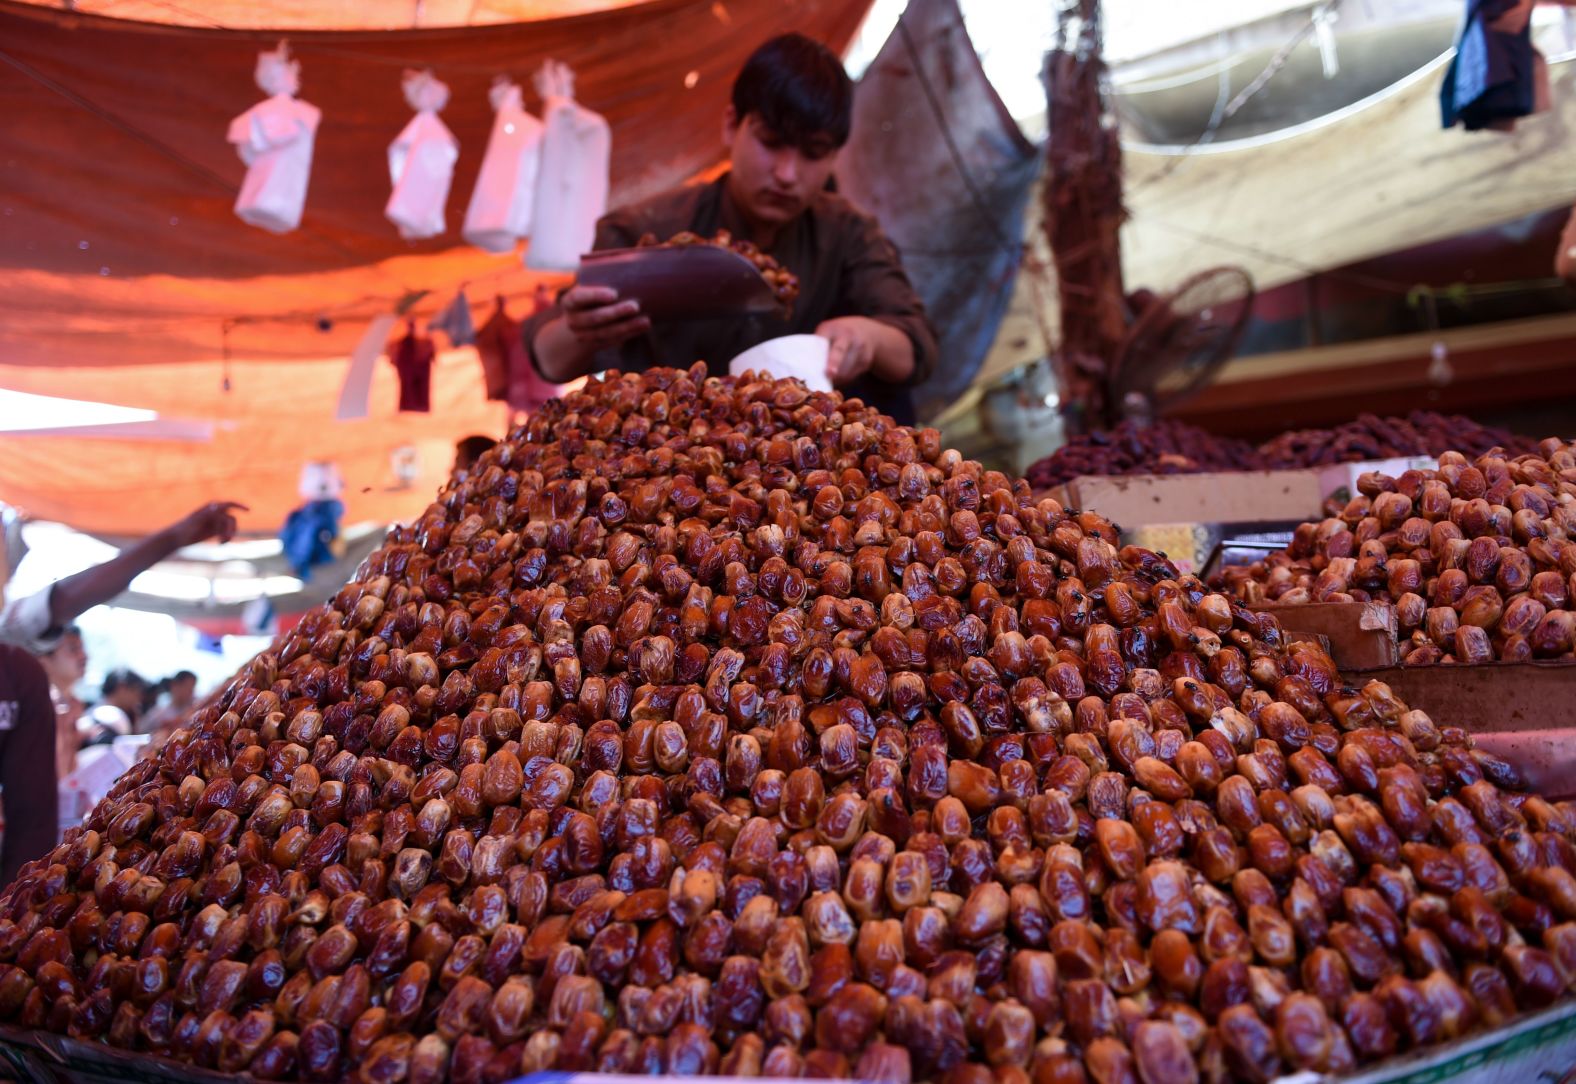 A Pakistani vendor sells dates at a market in Karachi on May 5, in preparation for the Muslim fasting month of Ramadan.